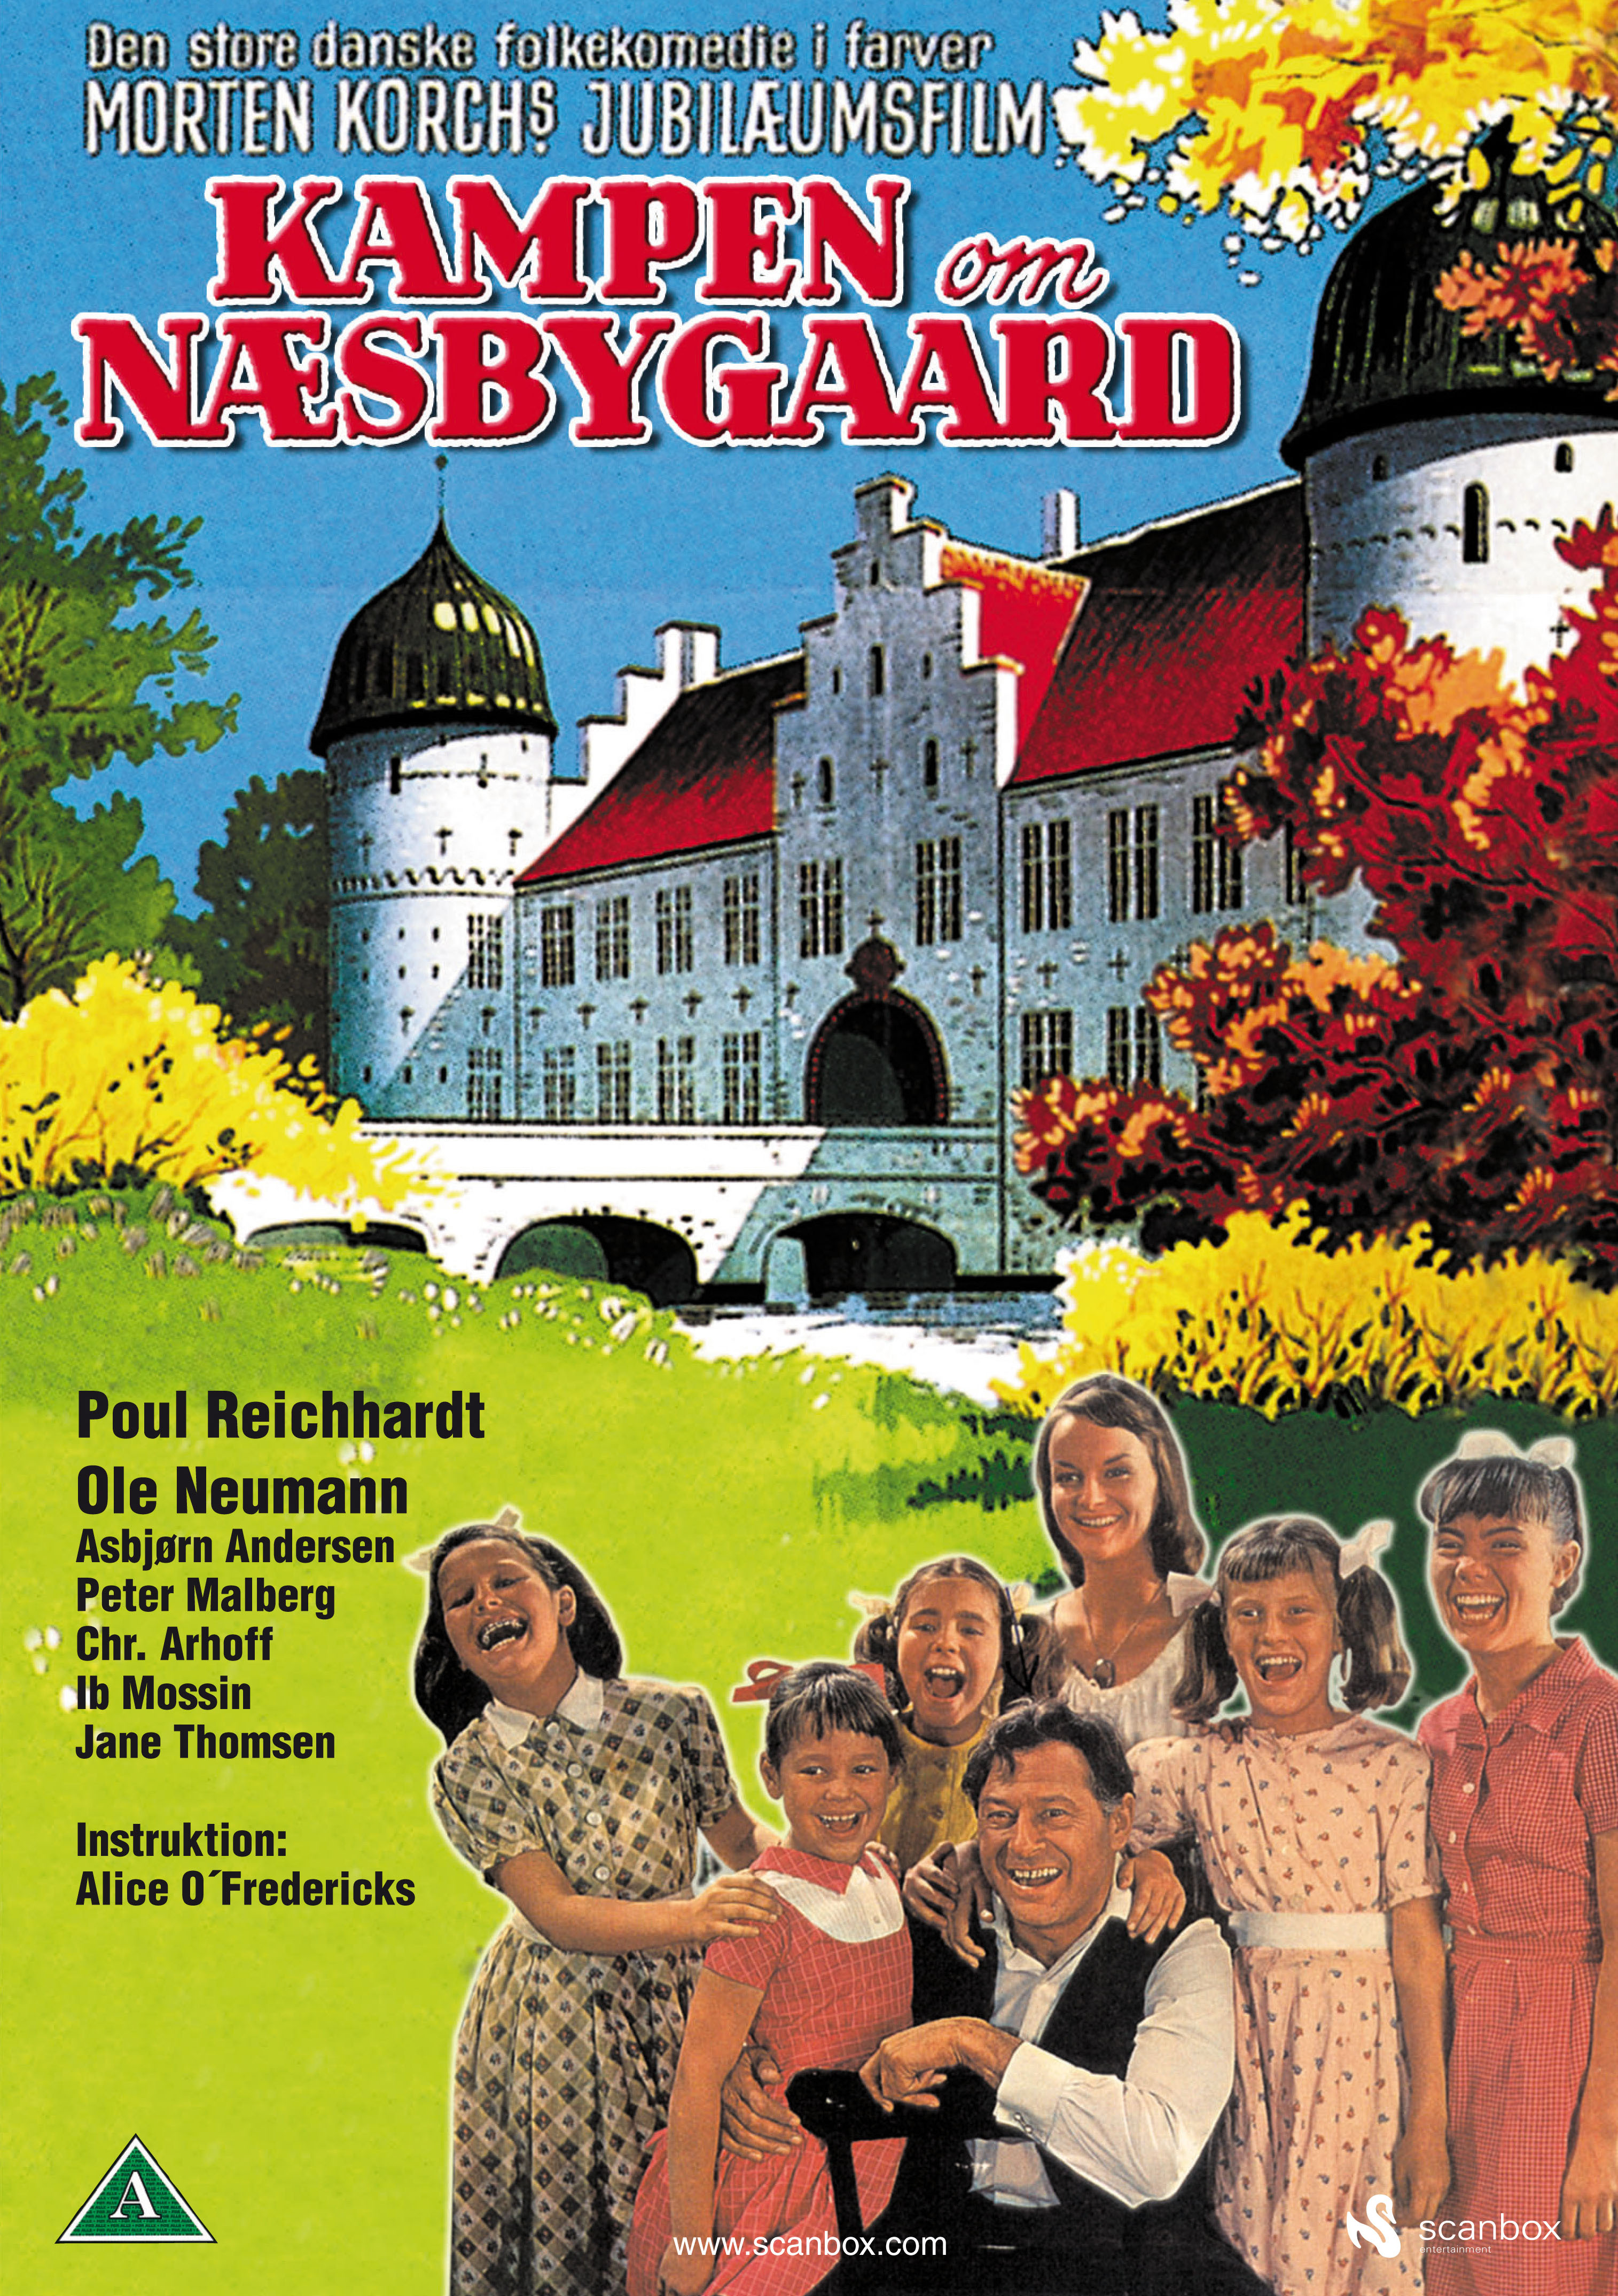 The Battle for Naesbygaard